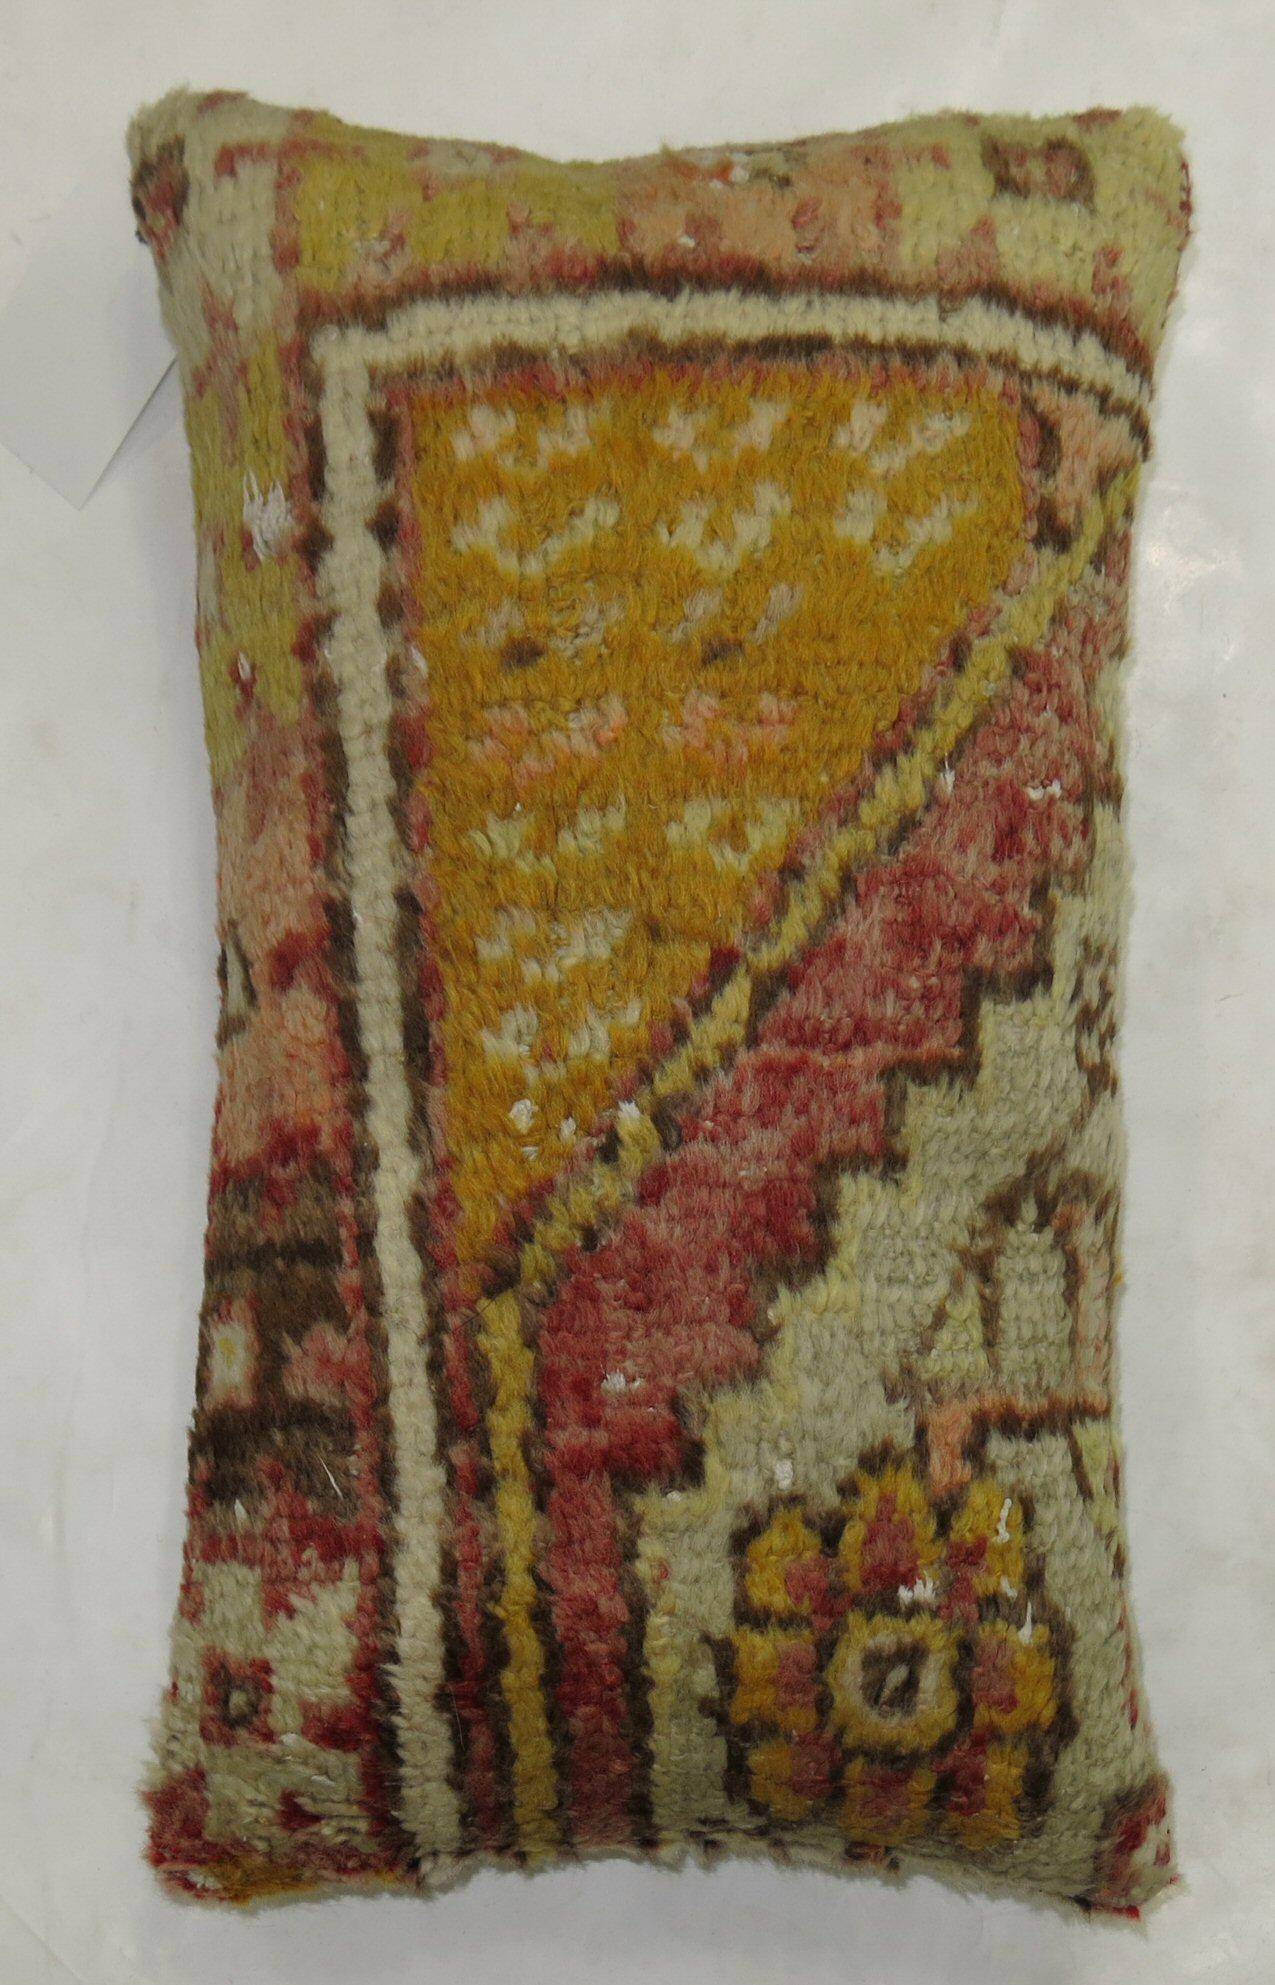 Lumbar size pillow made from a border of a tribal Turkish Anatolian rug from the 20th century

Size: 13